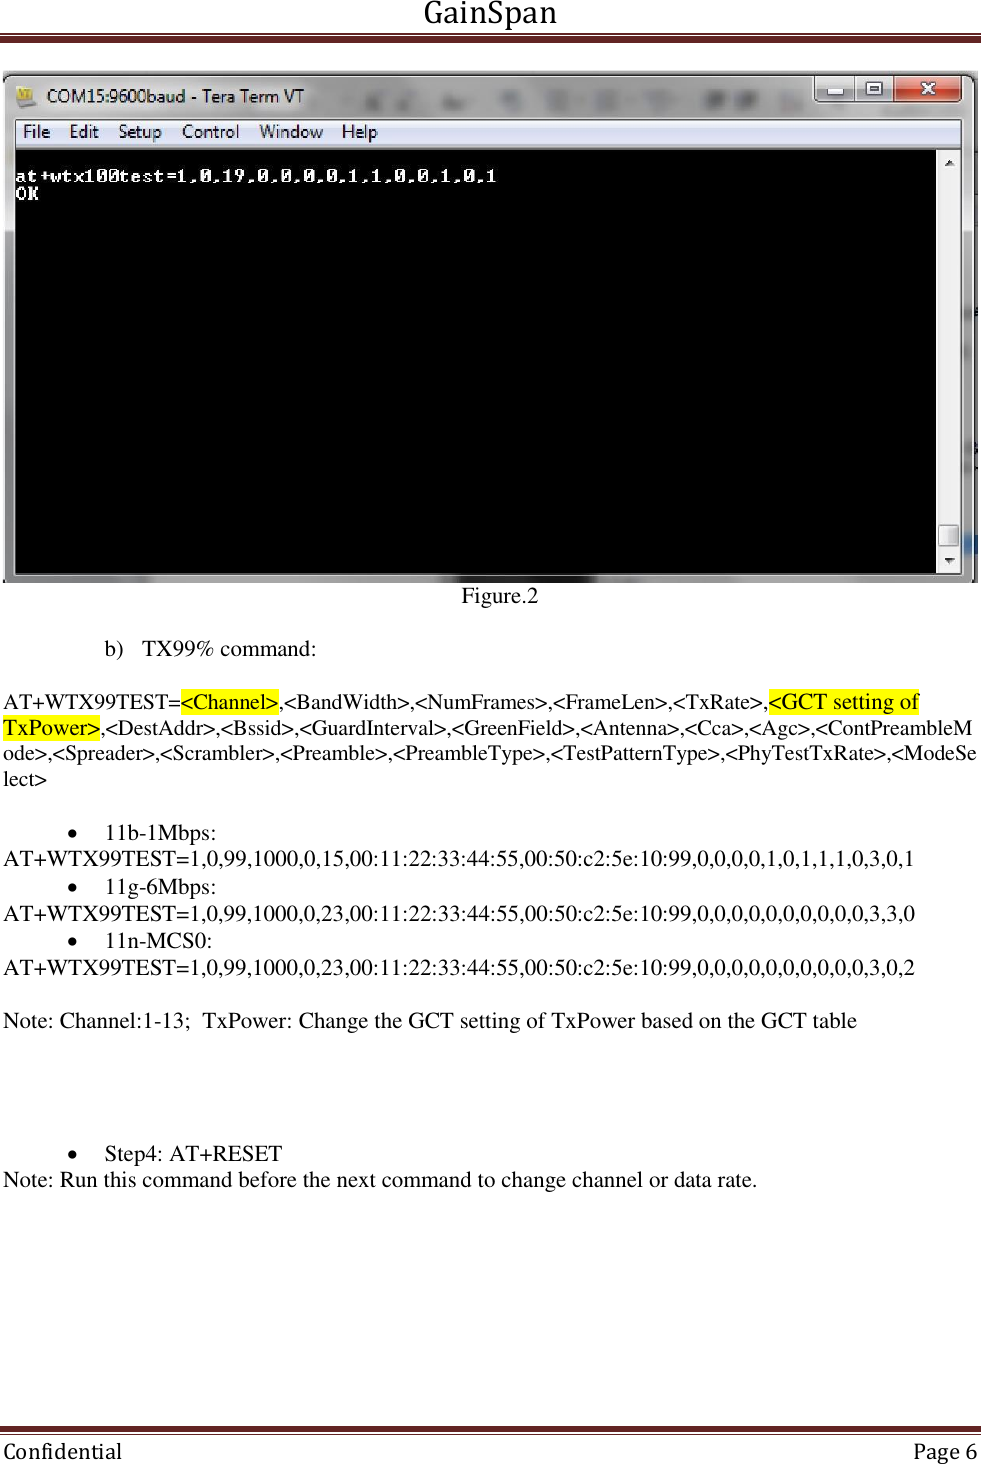 GainSpan  Confidential  Page 6                                                                                   Figure.2   b) TX99% command:  AT+WTX99TEST=&lt;Channel&gt;,&lt;BandWidth&gt;,&lt;NumFrames&gt;,&lt;FrameLen&gt;,&lt;TxRate&gt;,&lt;GCT setting of TxPower&gt;,&lt;DestAddr&gt;,&lt;Bssid&gt;,&lt;GuardInterval&gt;,&lt;GreenField&gt;,&lt;Antenna&gt;,&lt;Cca&gt;,&lt;Agc&gt;,&lt;ContPreambleMode&gt;,&lt;Spreader&gt;,&lt;Scrambler&gt;,&lt;Preamble&gt;,&lt;PreambleType&gt;,&lt;TestPatternType&gt;,&lt;PhyTestTxRate&gt;,&lt;ModeSelect&gt;   11b-1Mbps:  AT+WTX99TEST=1,0,99,1000,0,15,00:11:22:33:44:55,00:50:c2:5e:10:99,0,0,0,0,1,0,1,1,1,0,3,0,1  11g-6Mbps:  AT+WTX99TEST=1,0,99,1000,0,23,00:11:22:33:44:55,00:50:c2:5e:10:99,0,0,0,0,0,0,0,0,0,0,3,3,0  11n-MCS0:  AT+WTX99TEST=1,0,99,1000,0,23,00:11:22:33:44:55,00:50:c2:5e:10:99,0,0,0,0,0,0,0,0,0,0,3,0,2  Note: Channel:1-13;  TxPower: Change the GCT setting of TxPower based on the GCT table      Step4: AT+RESET  Note: Run this command before the next command to change channel or data rate.  